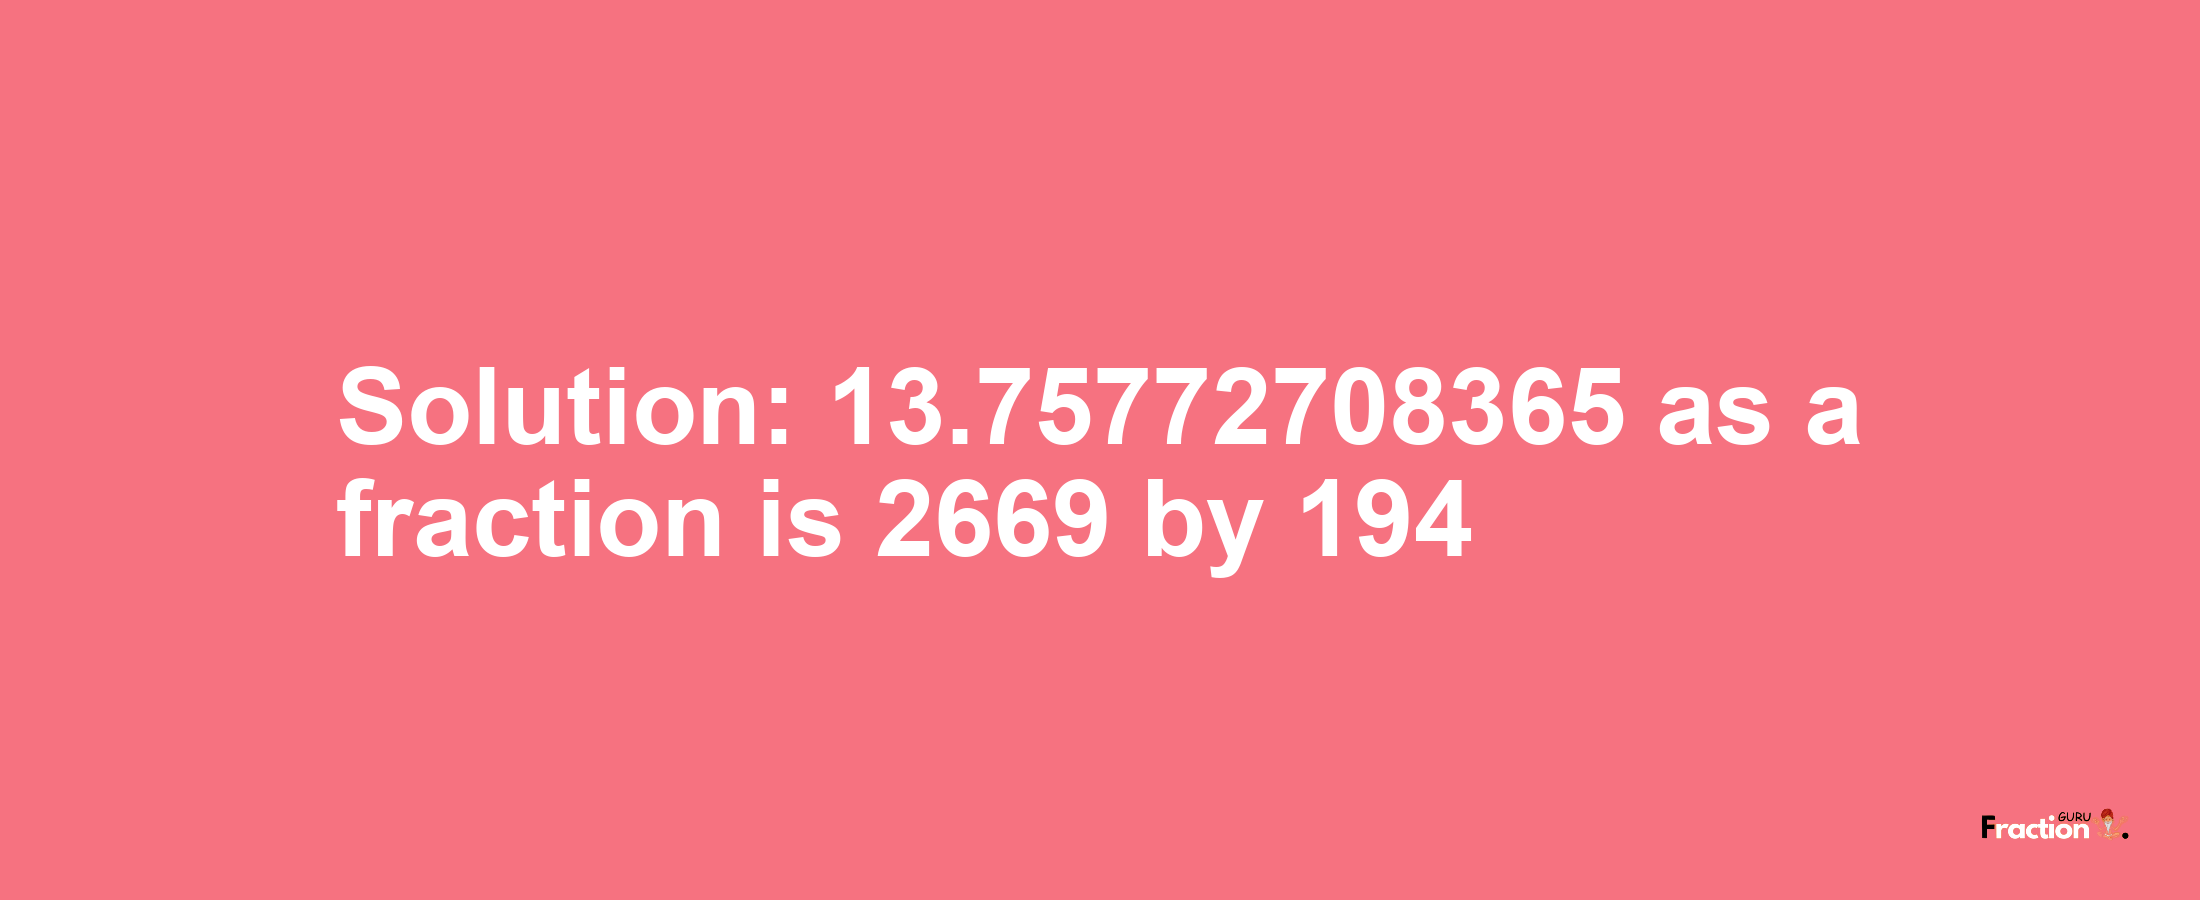 Solution:13.75772708365 as a fraction is 2669/194